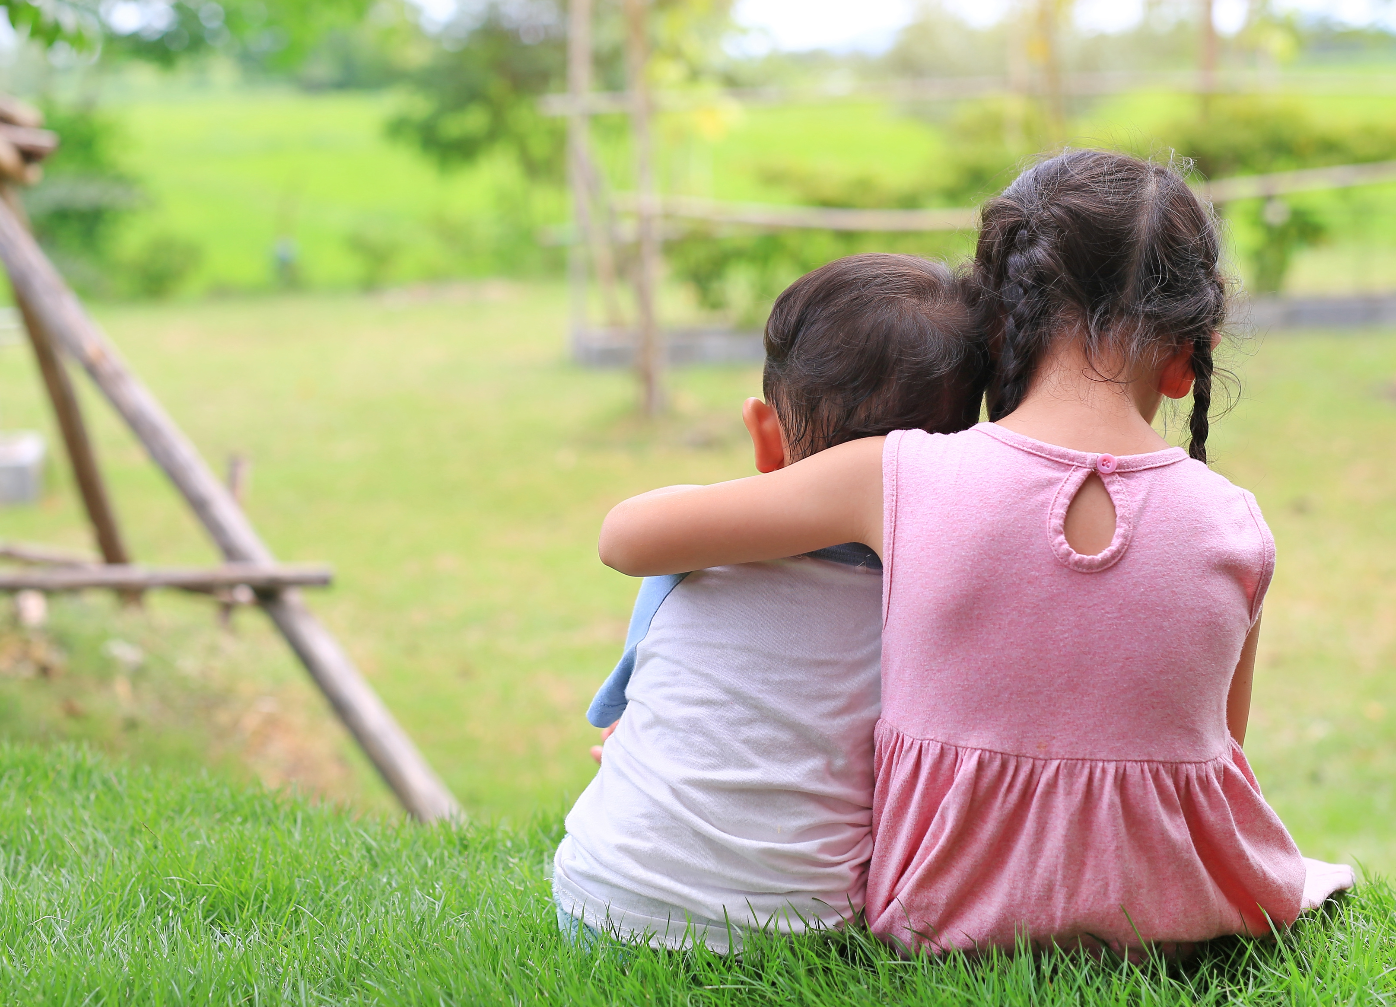 The backs of two children in a field